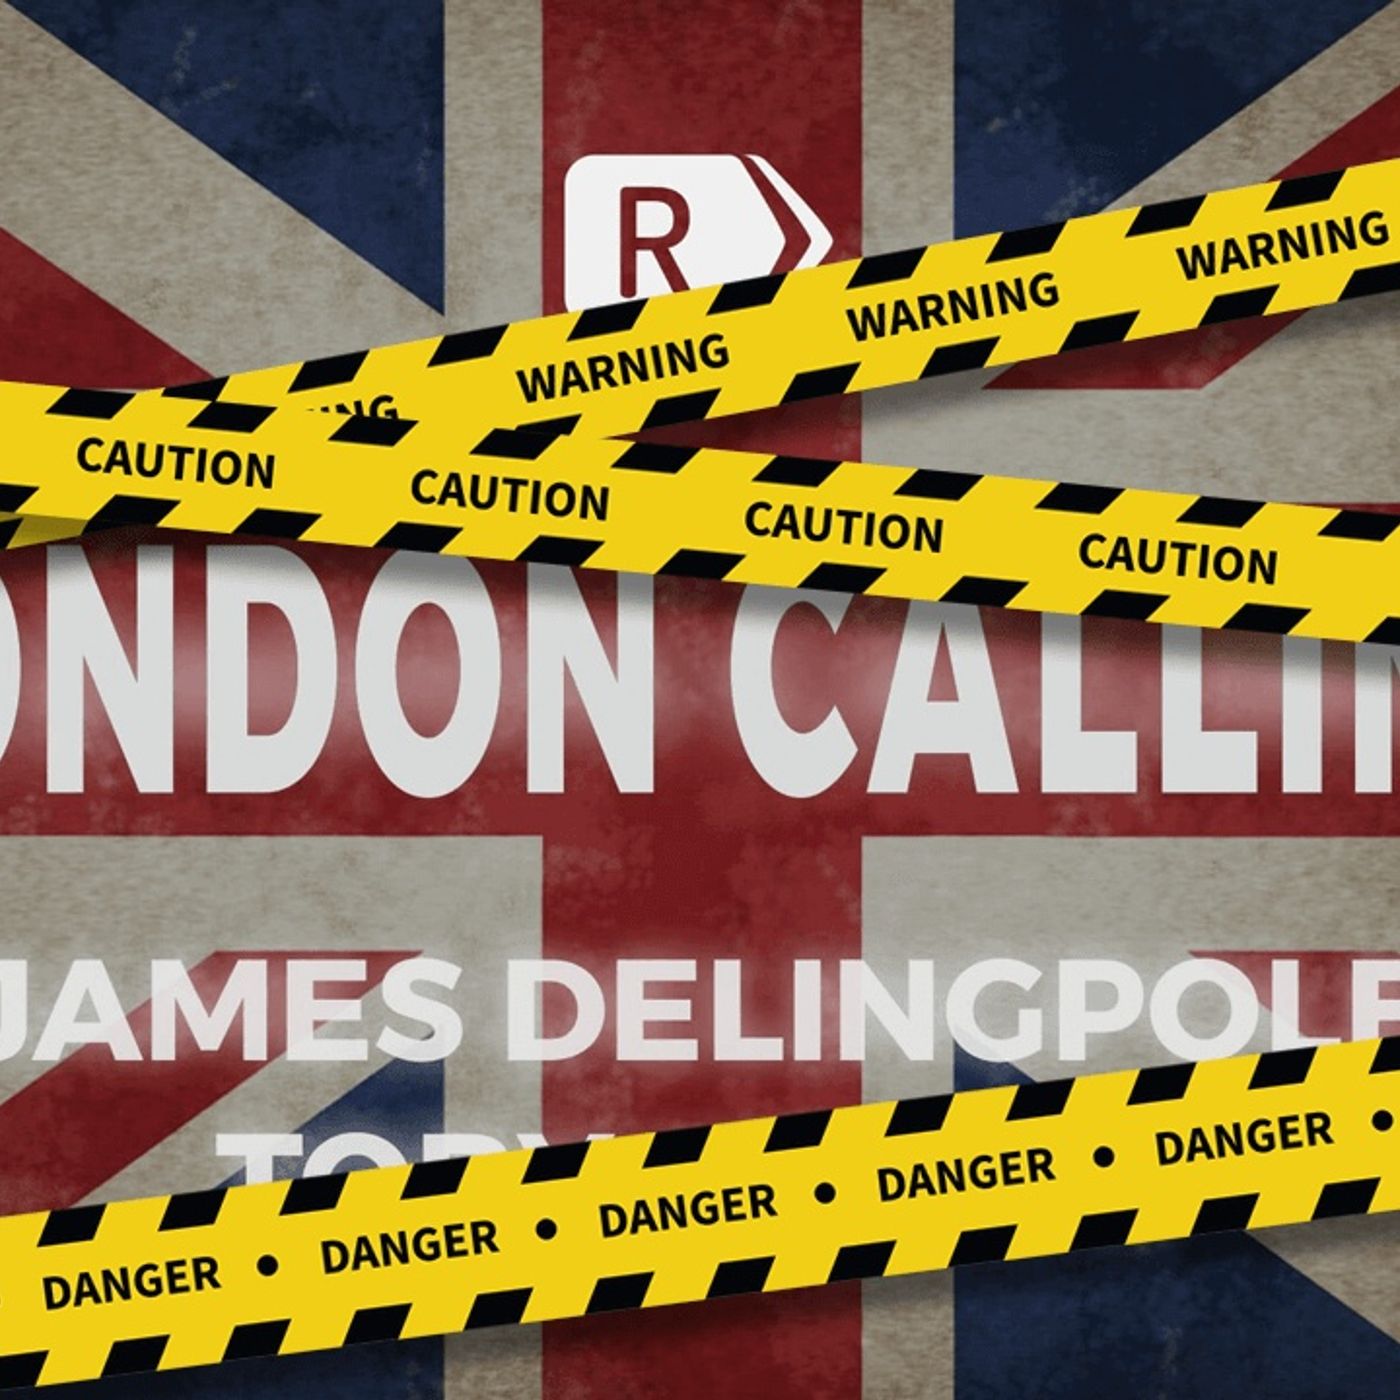 The London Calling Experience